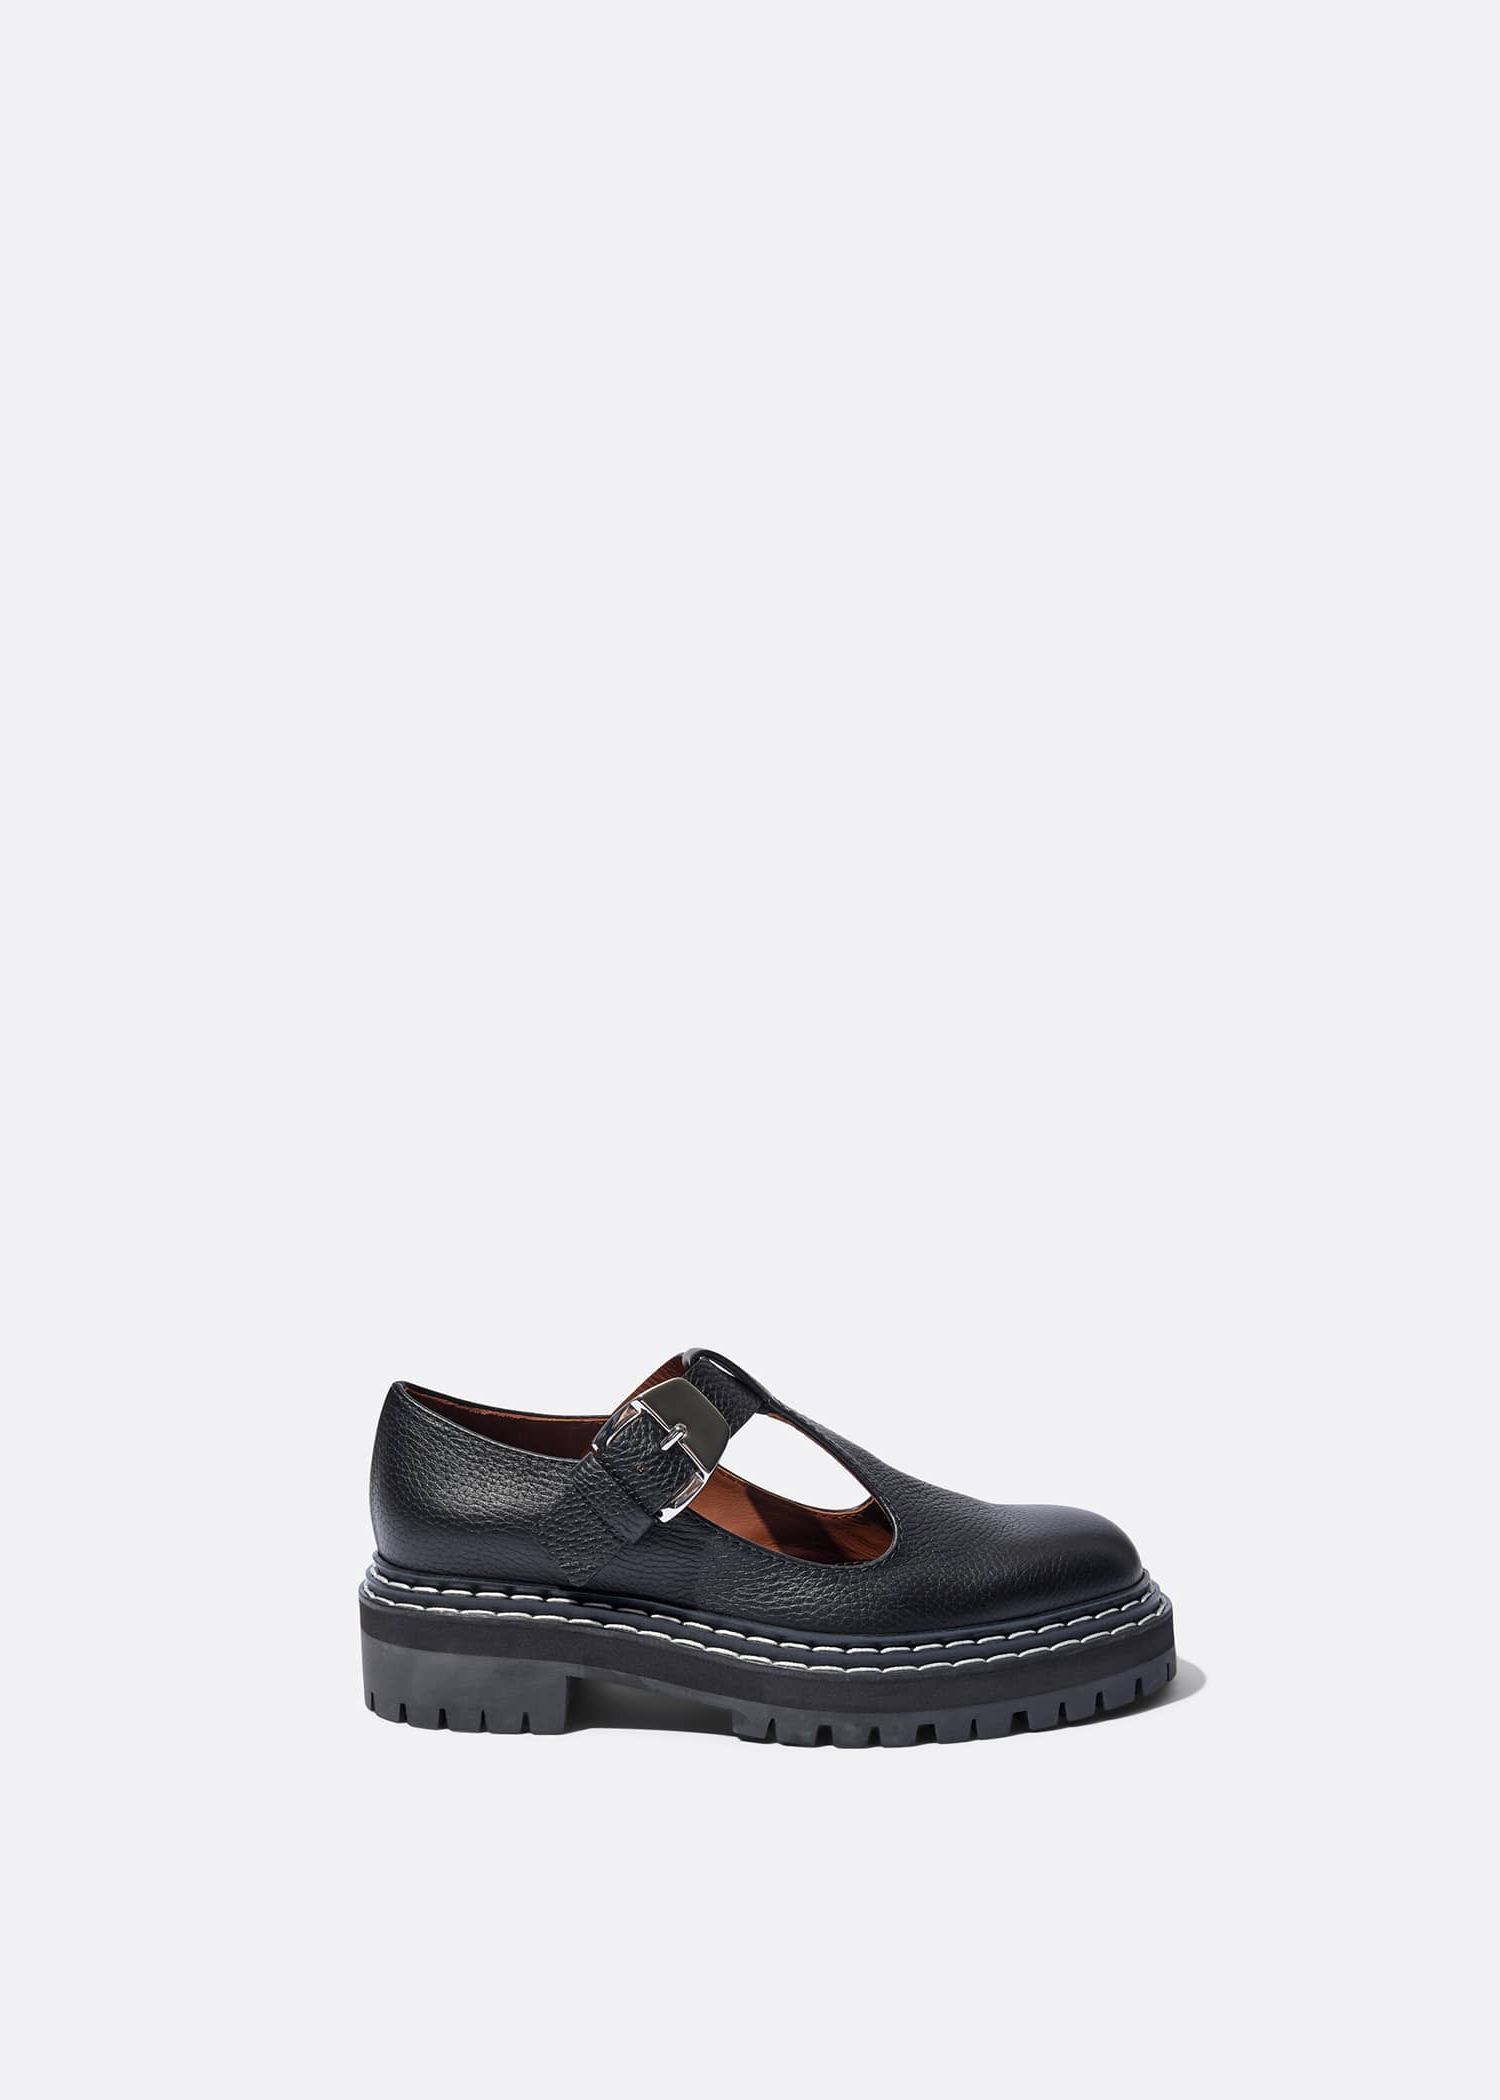 Proenza Schouler Lug Sole Mary Jane Loafers